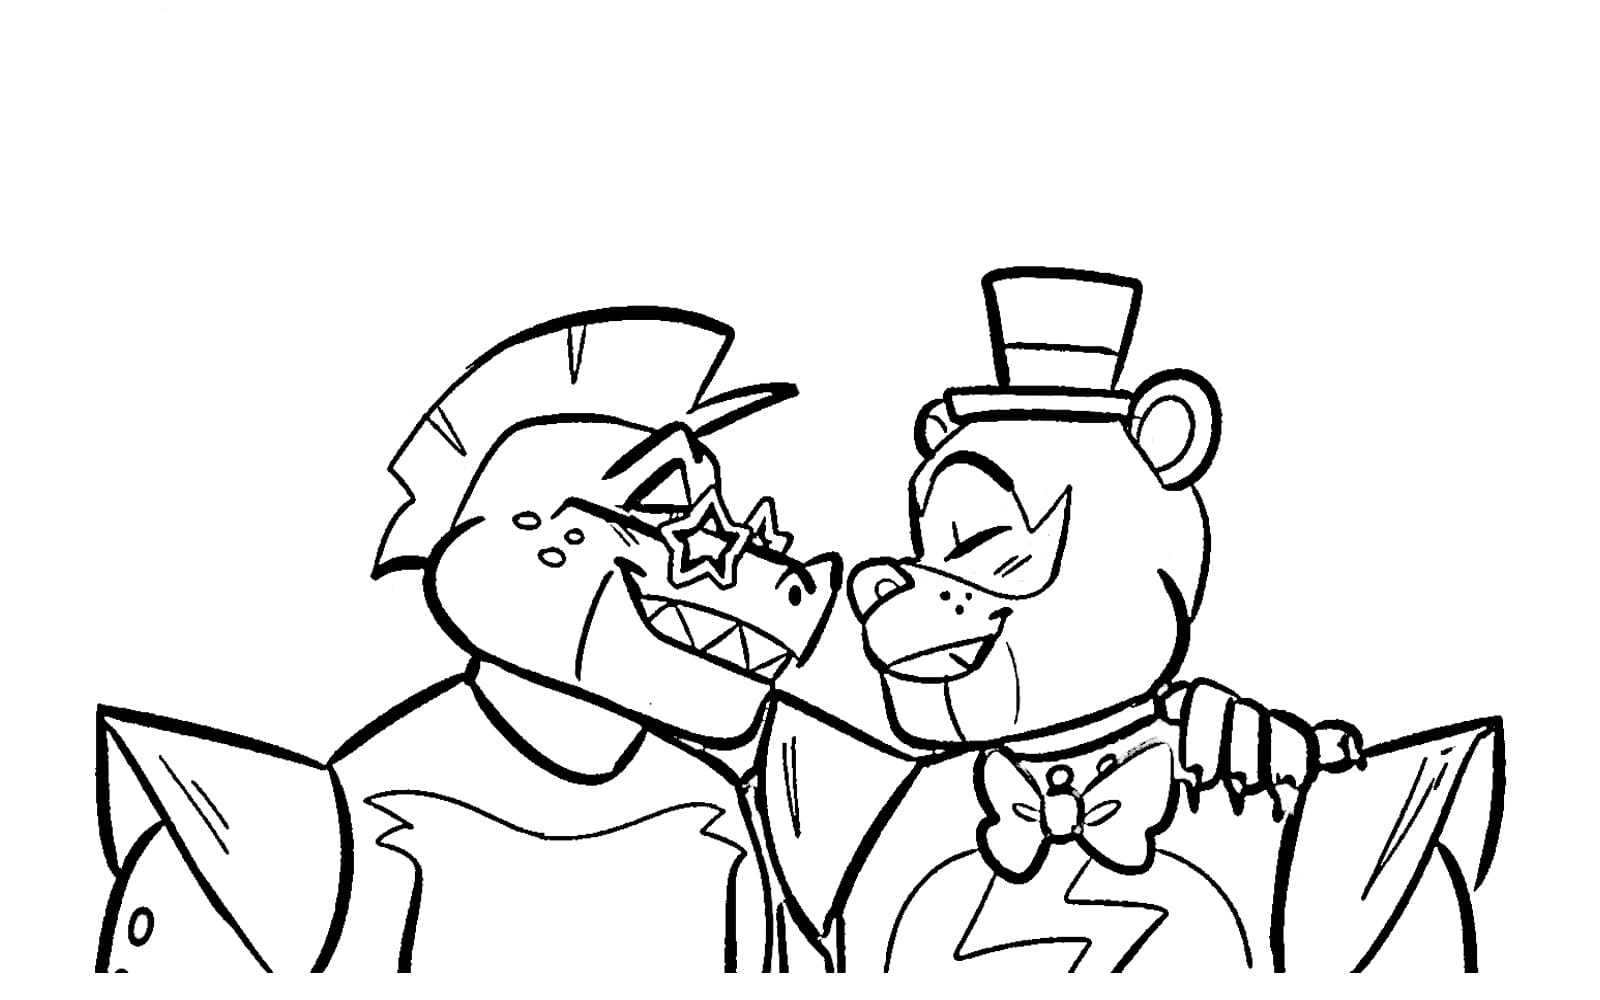 Coloring page Monty Monty and Freddy